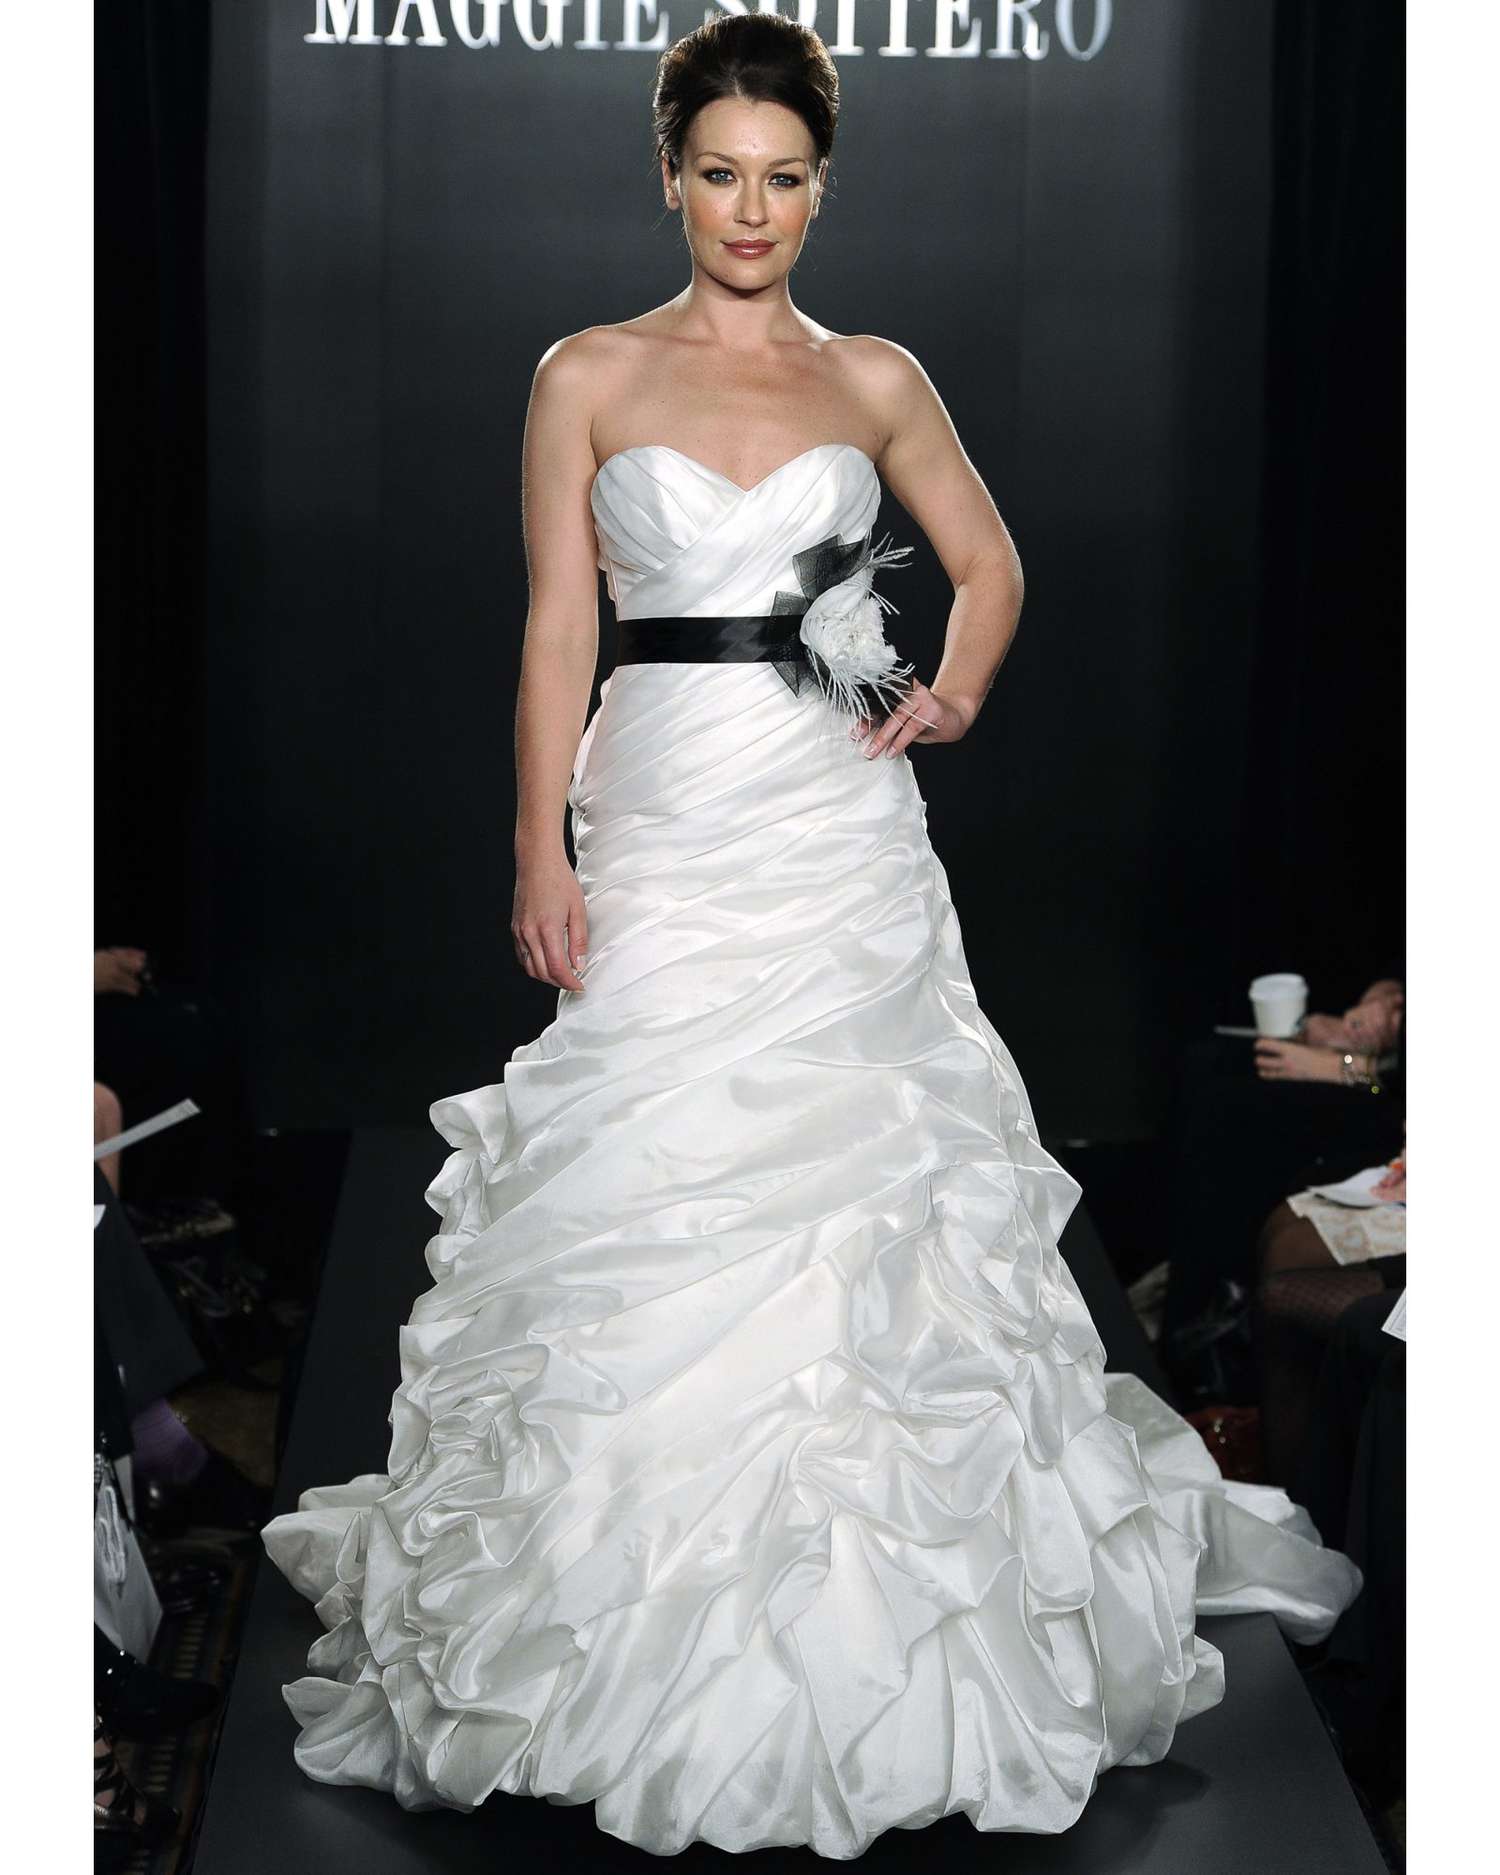 maggie-sottero-fall2012-wd108109_031.jpg